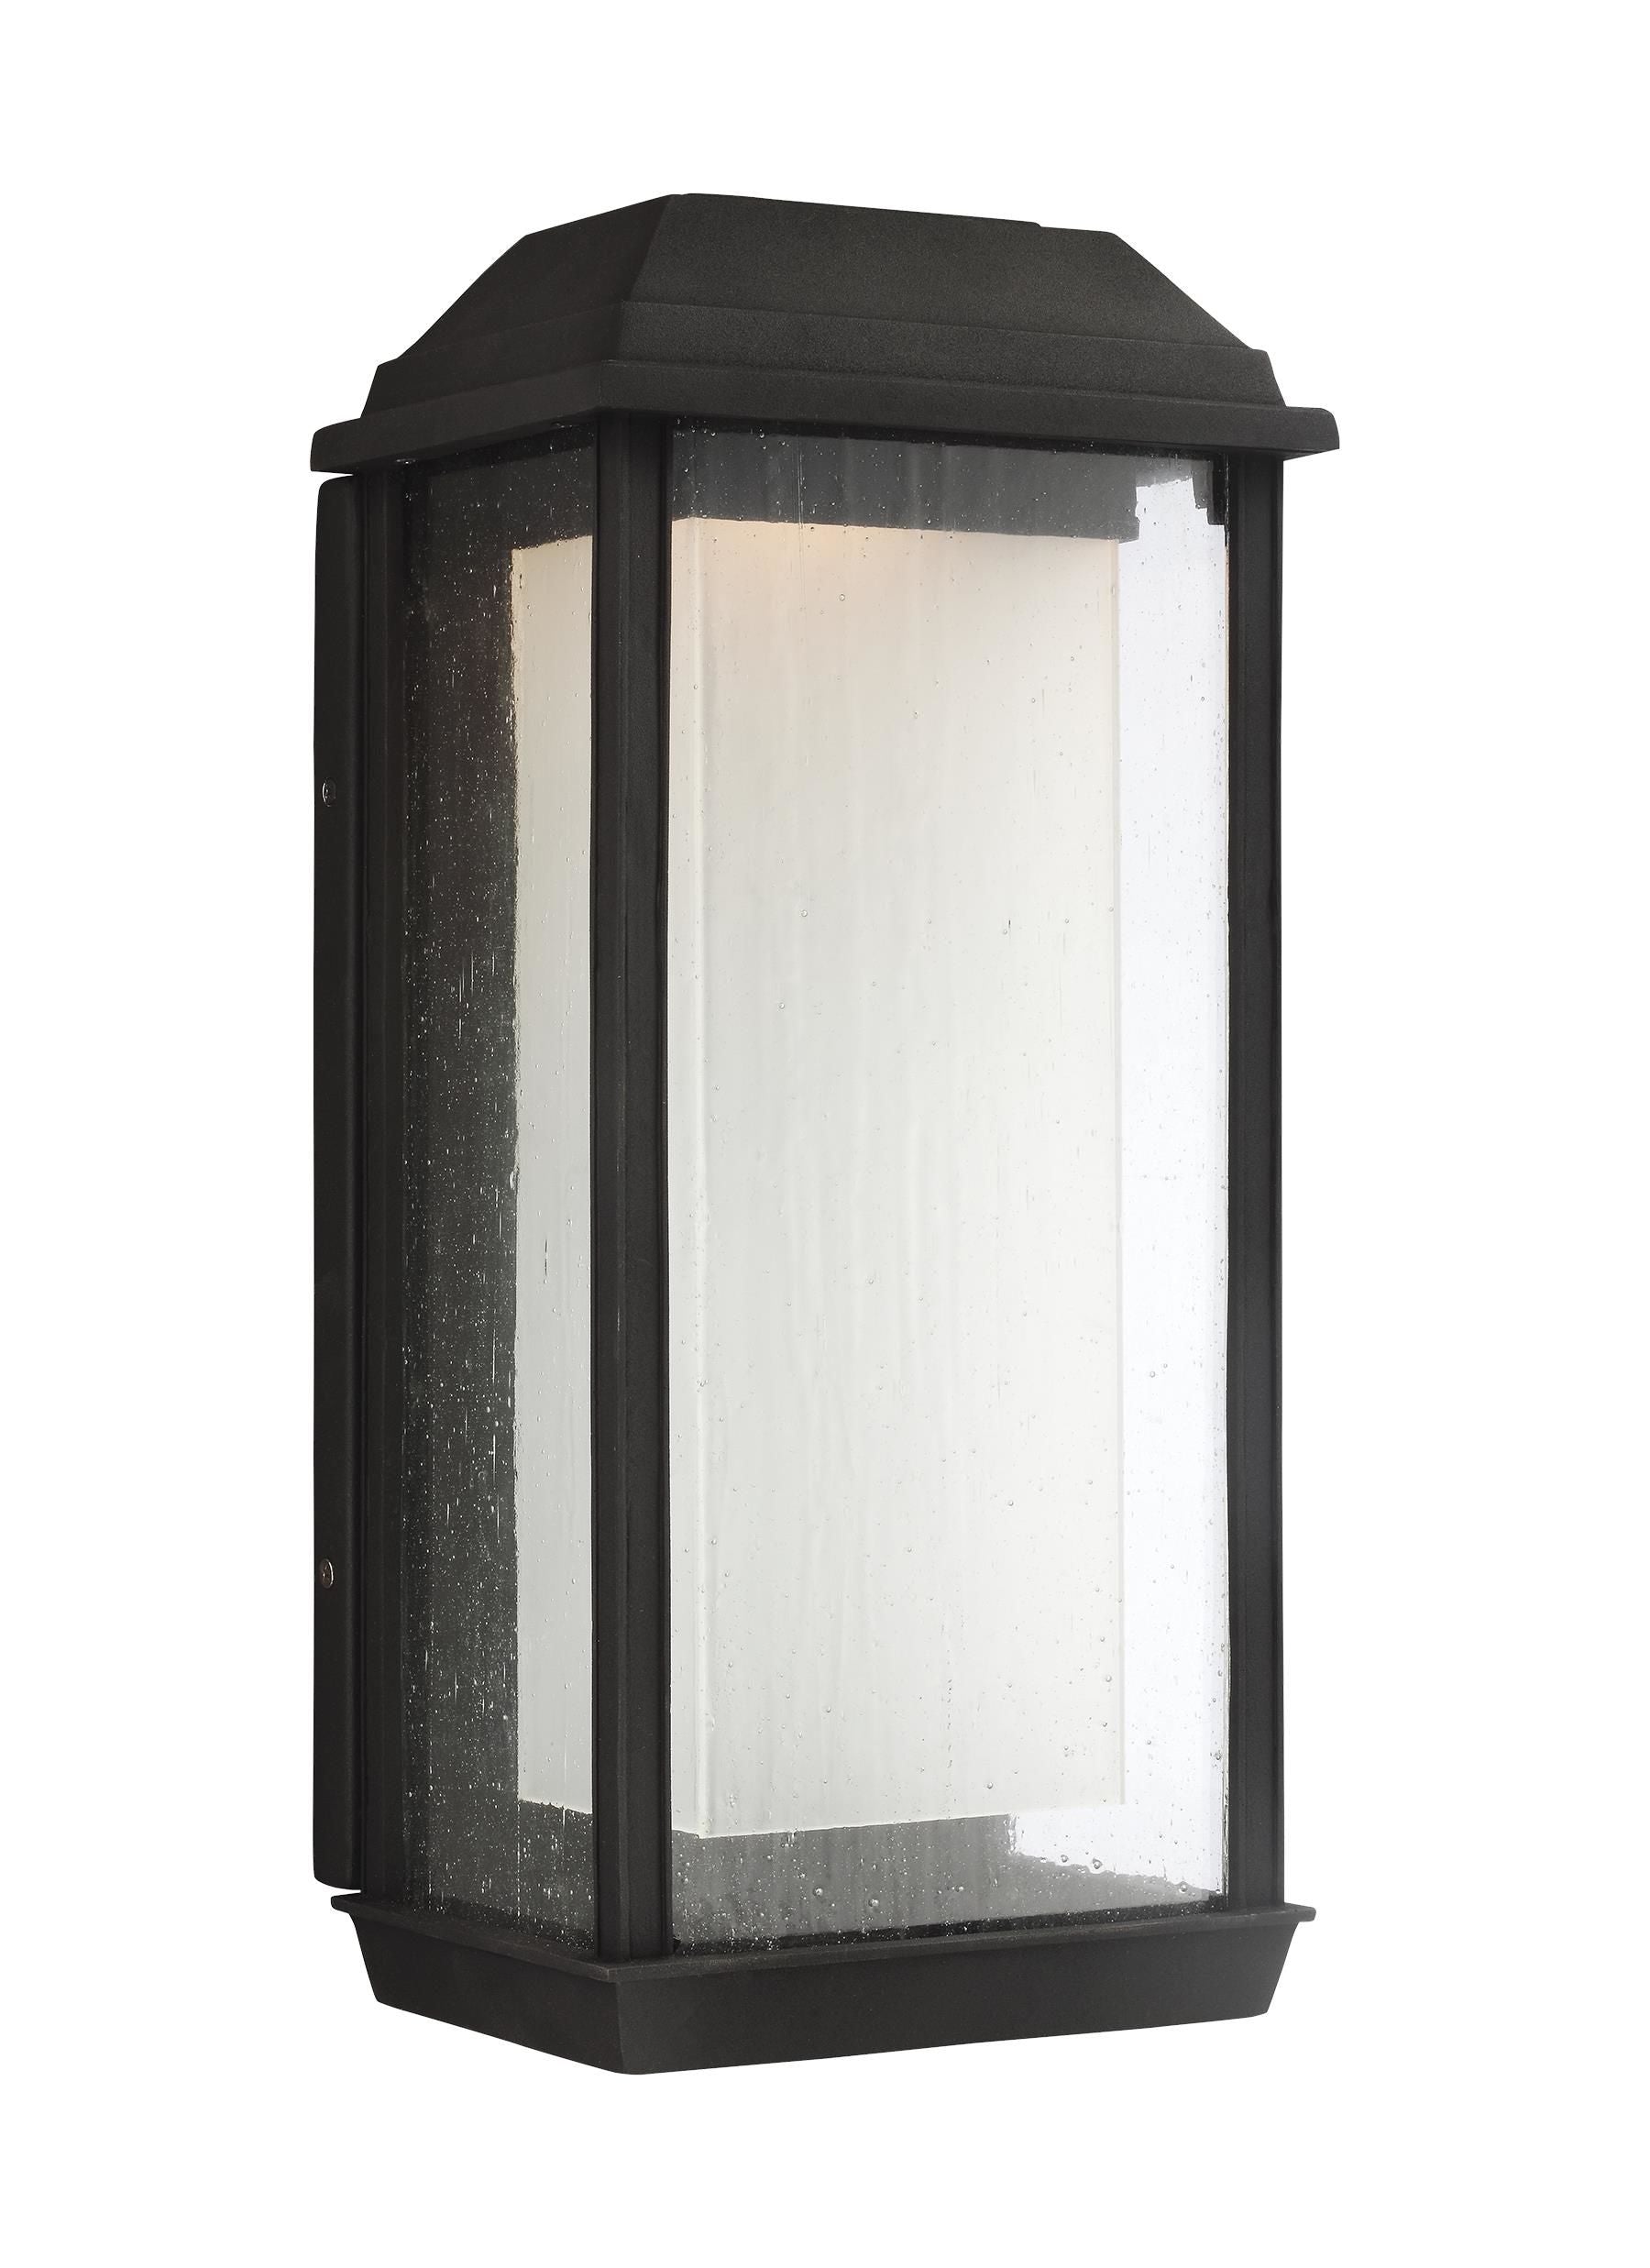 McHenry Outdoor sconce Black INTEGRATED LED - OL12802TXB-L1 | FEISS